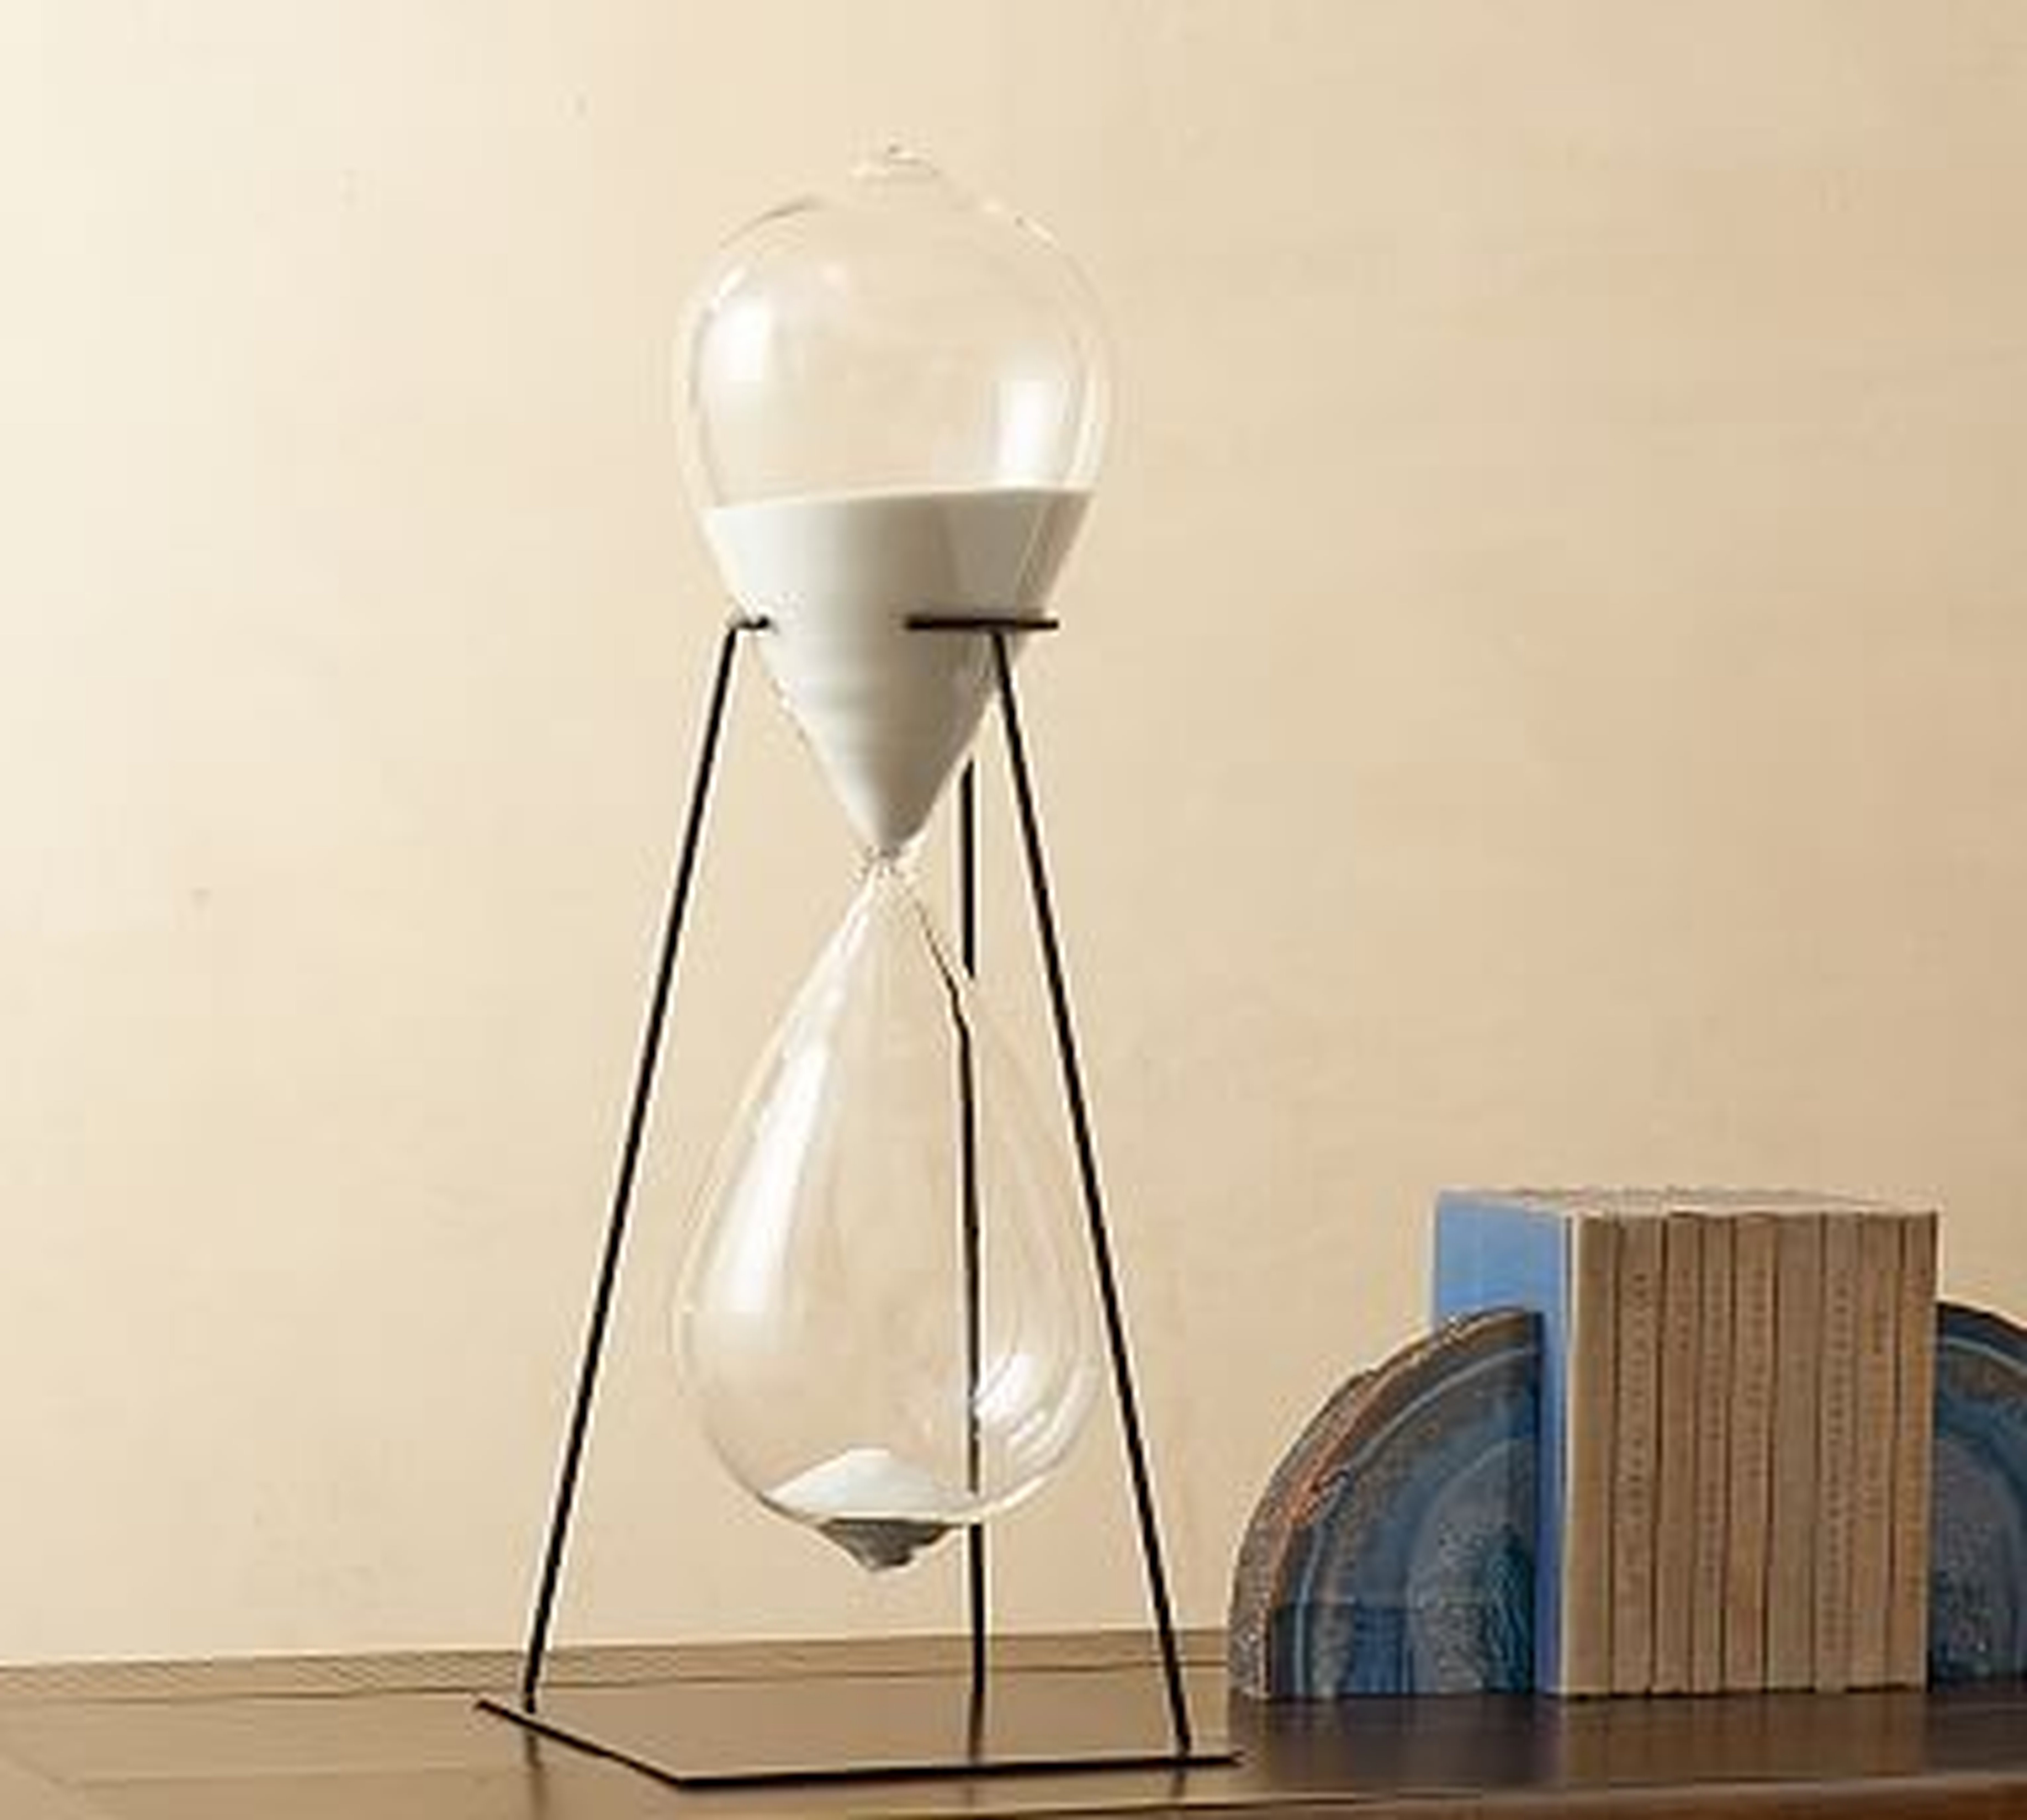 Hourglass Display Object - Pottery Barn